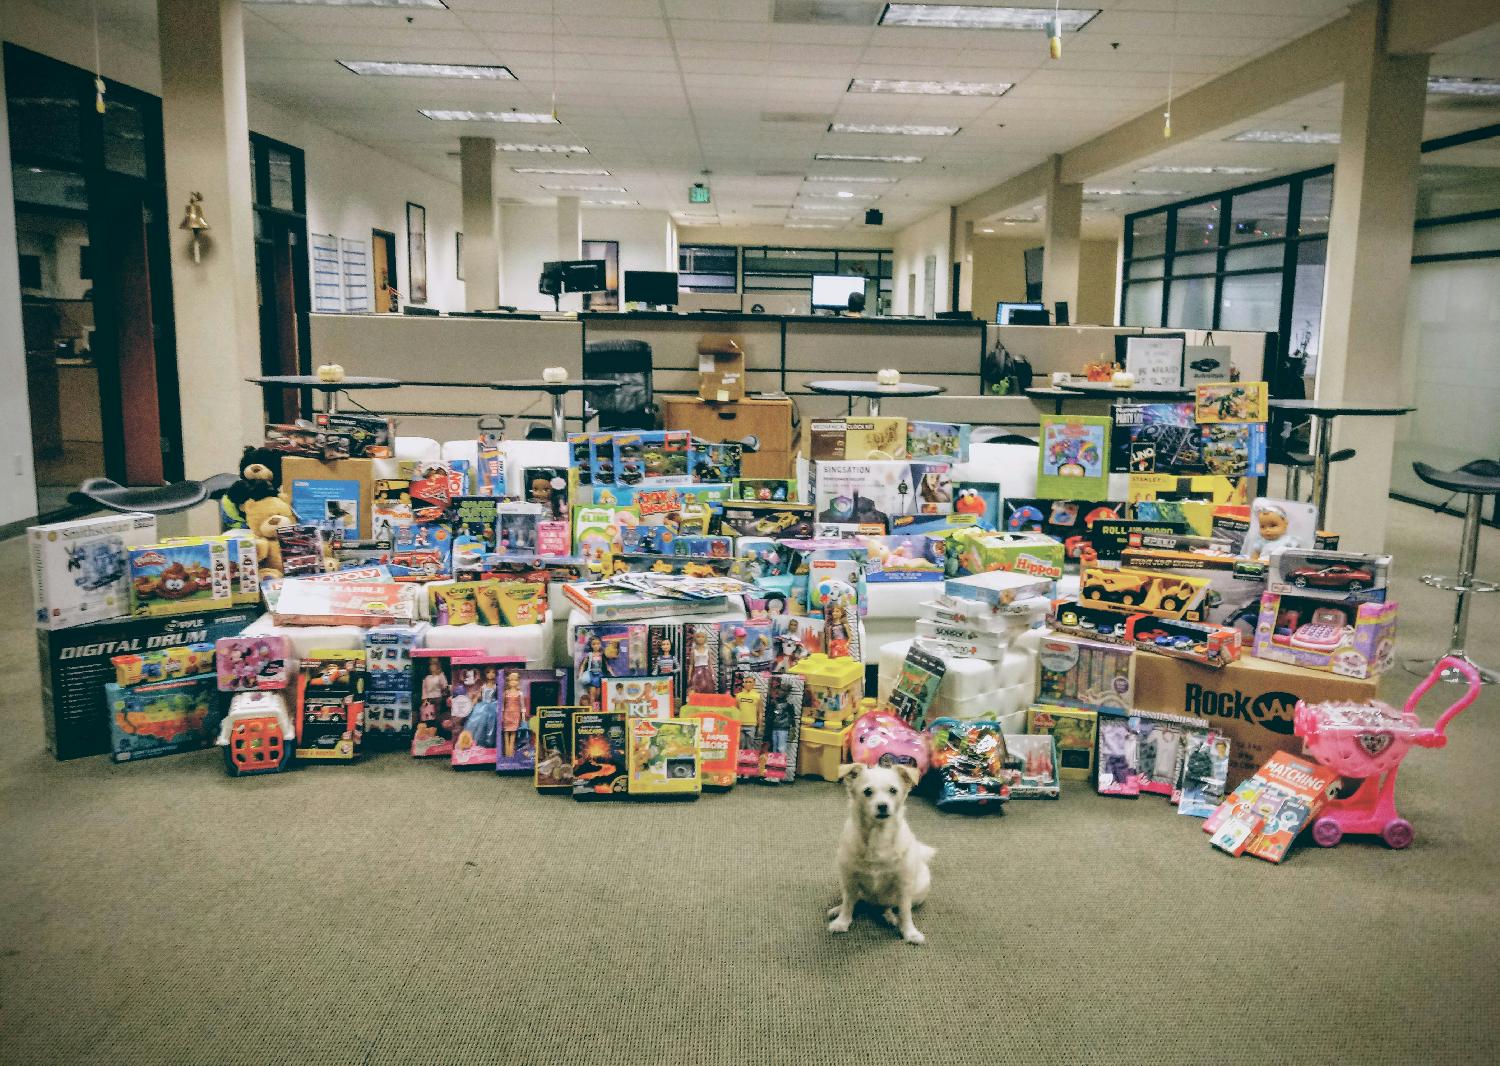 Charity toy drive supported by staff across the organization in 2019.